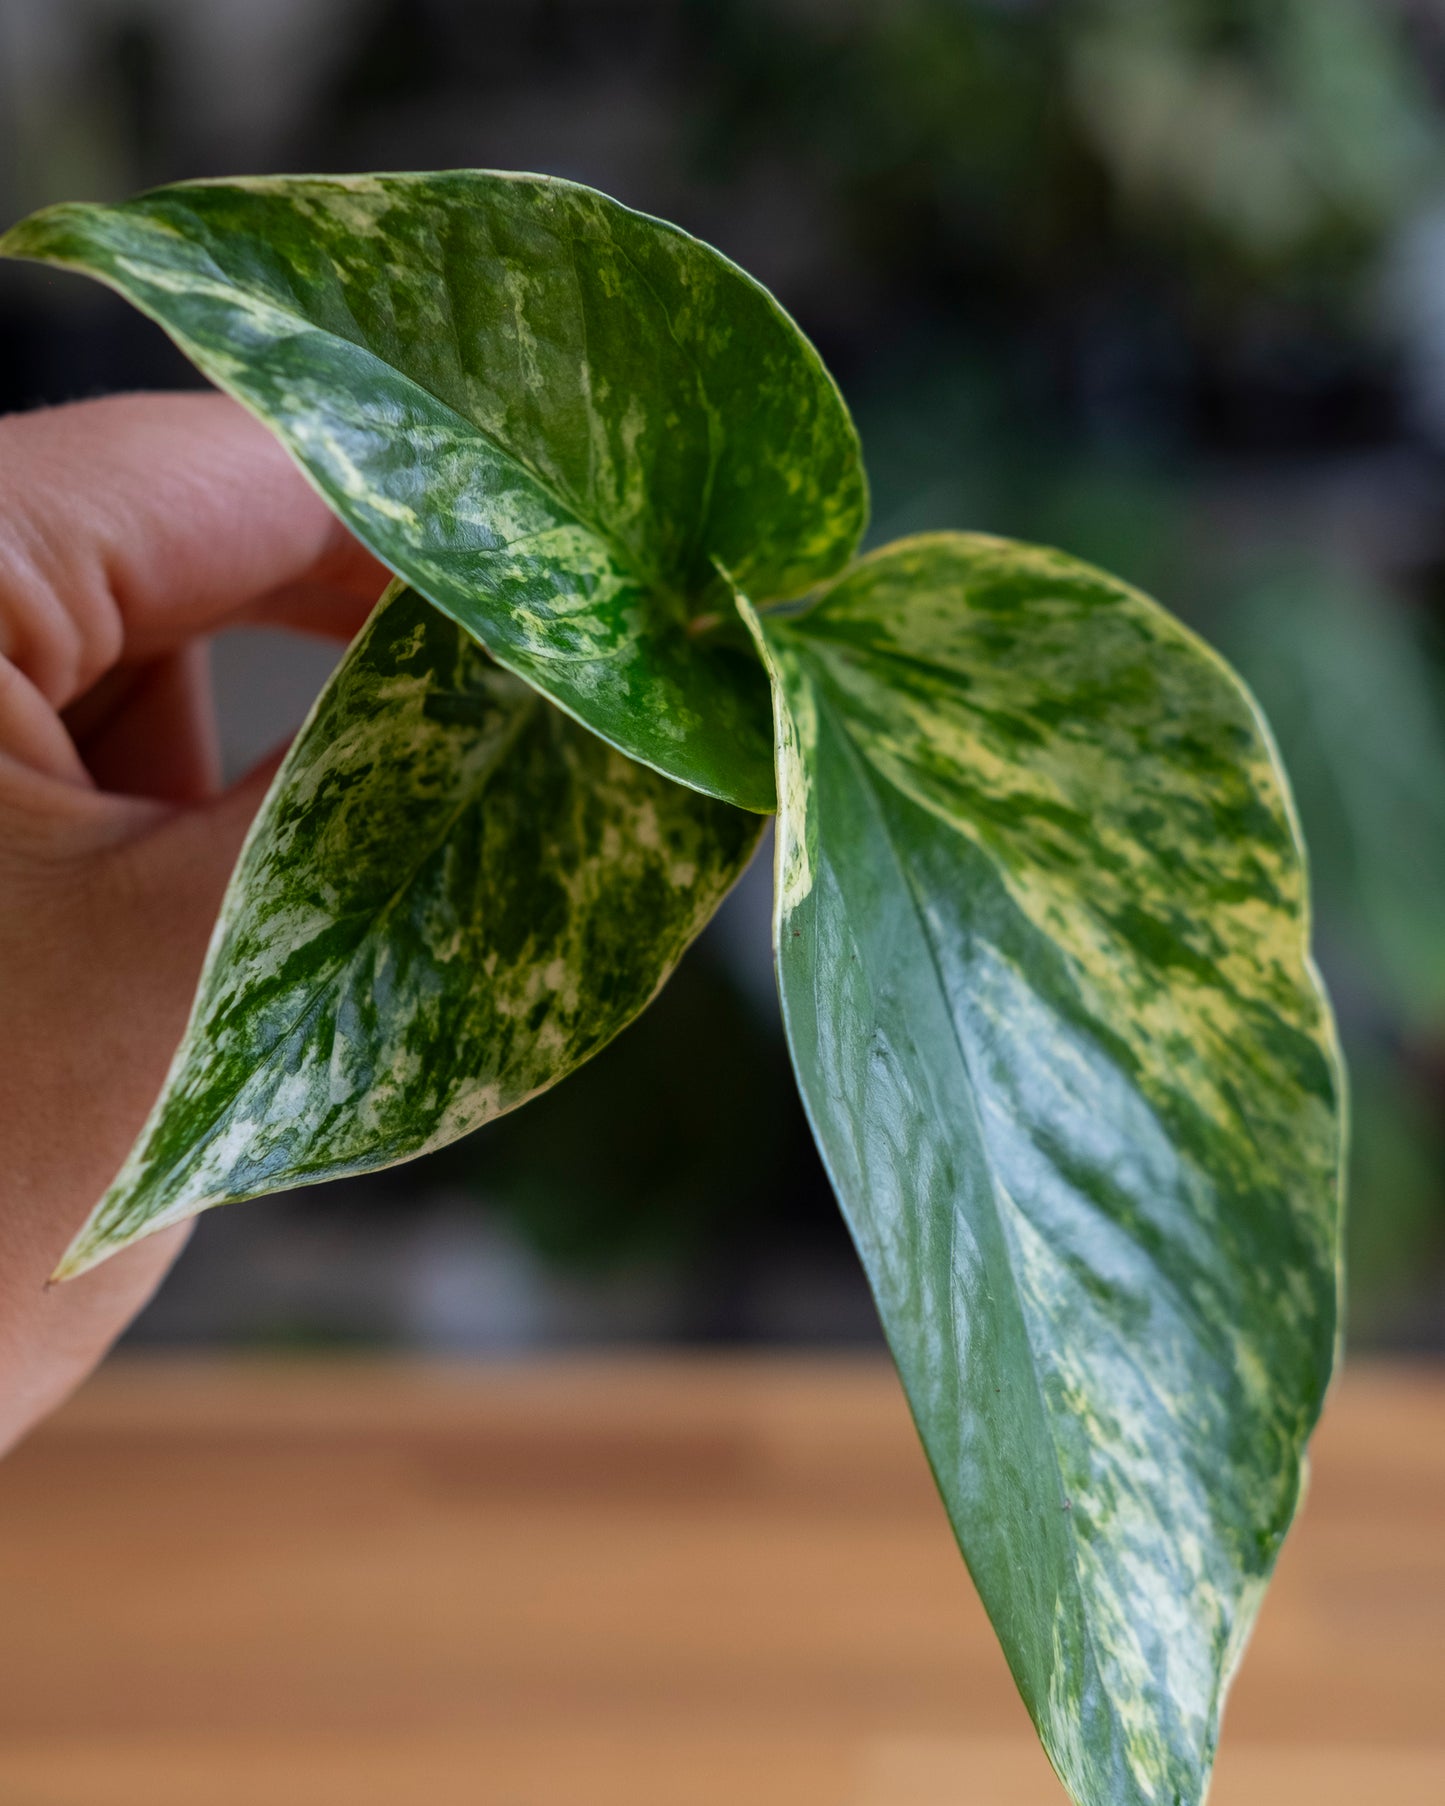 Marble queen pothos leaves